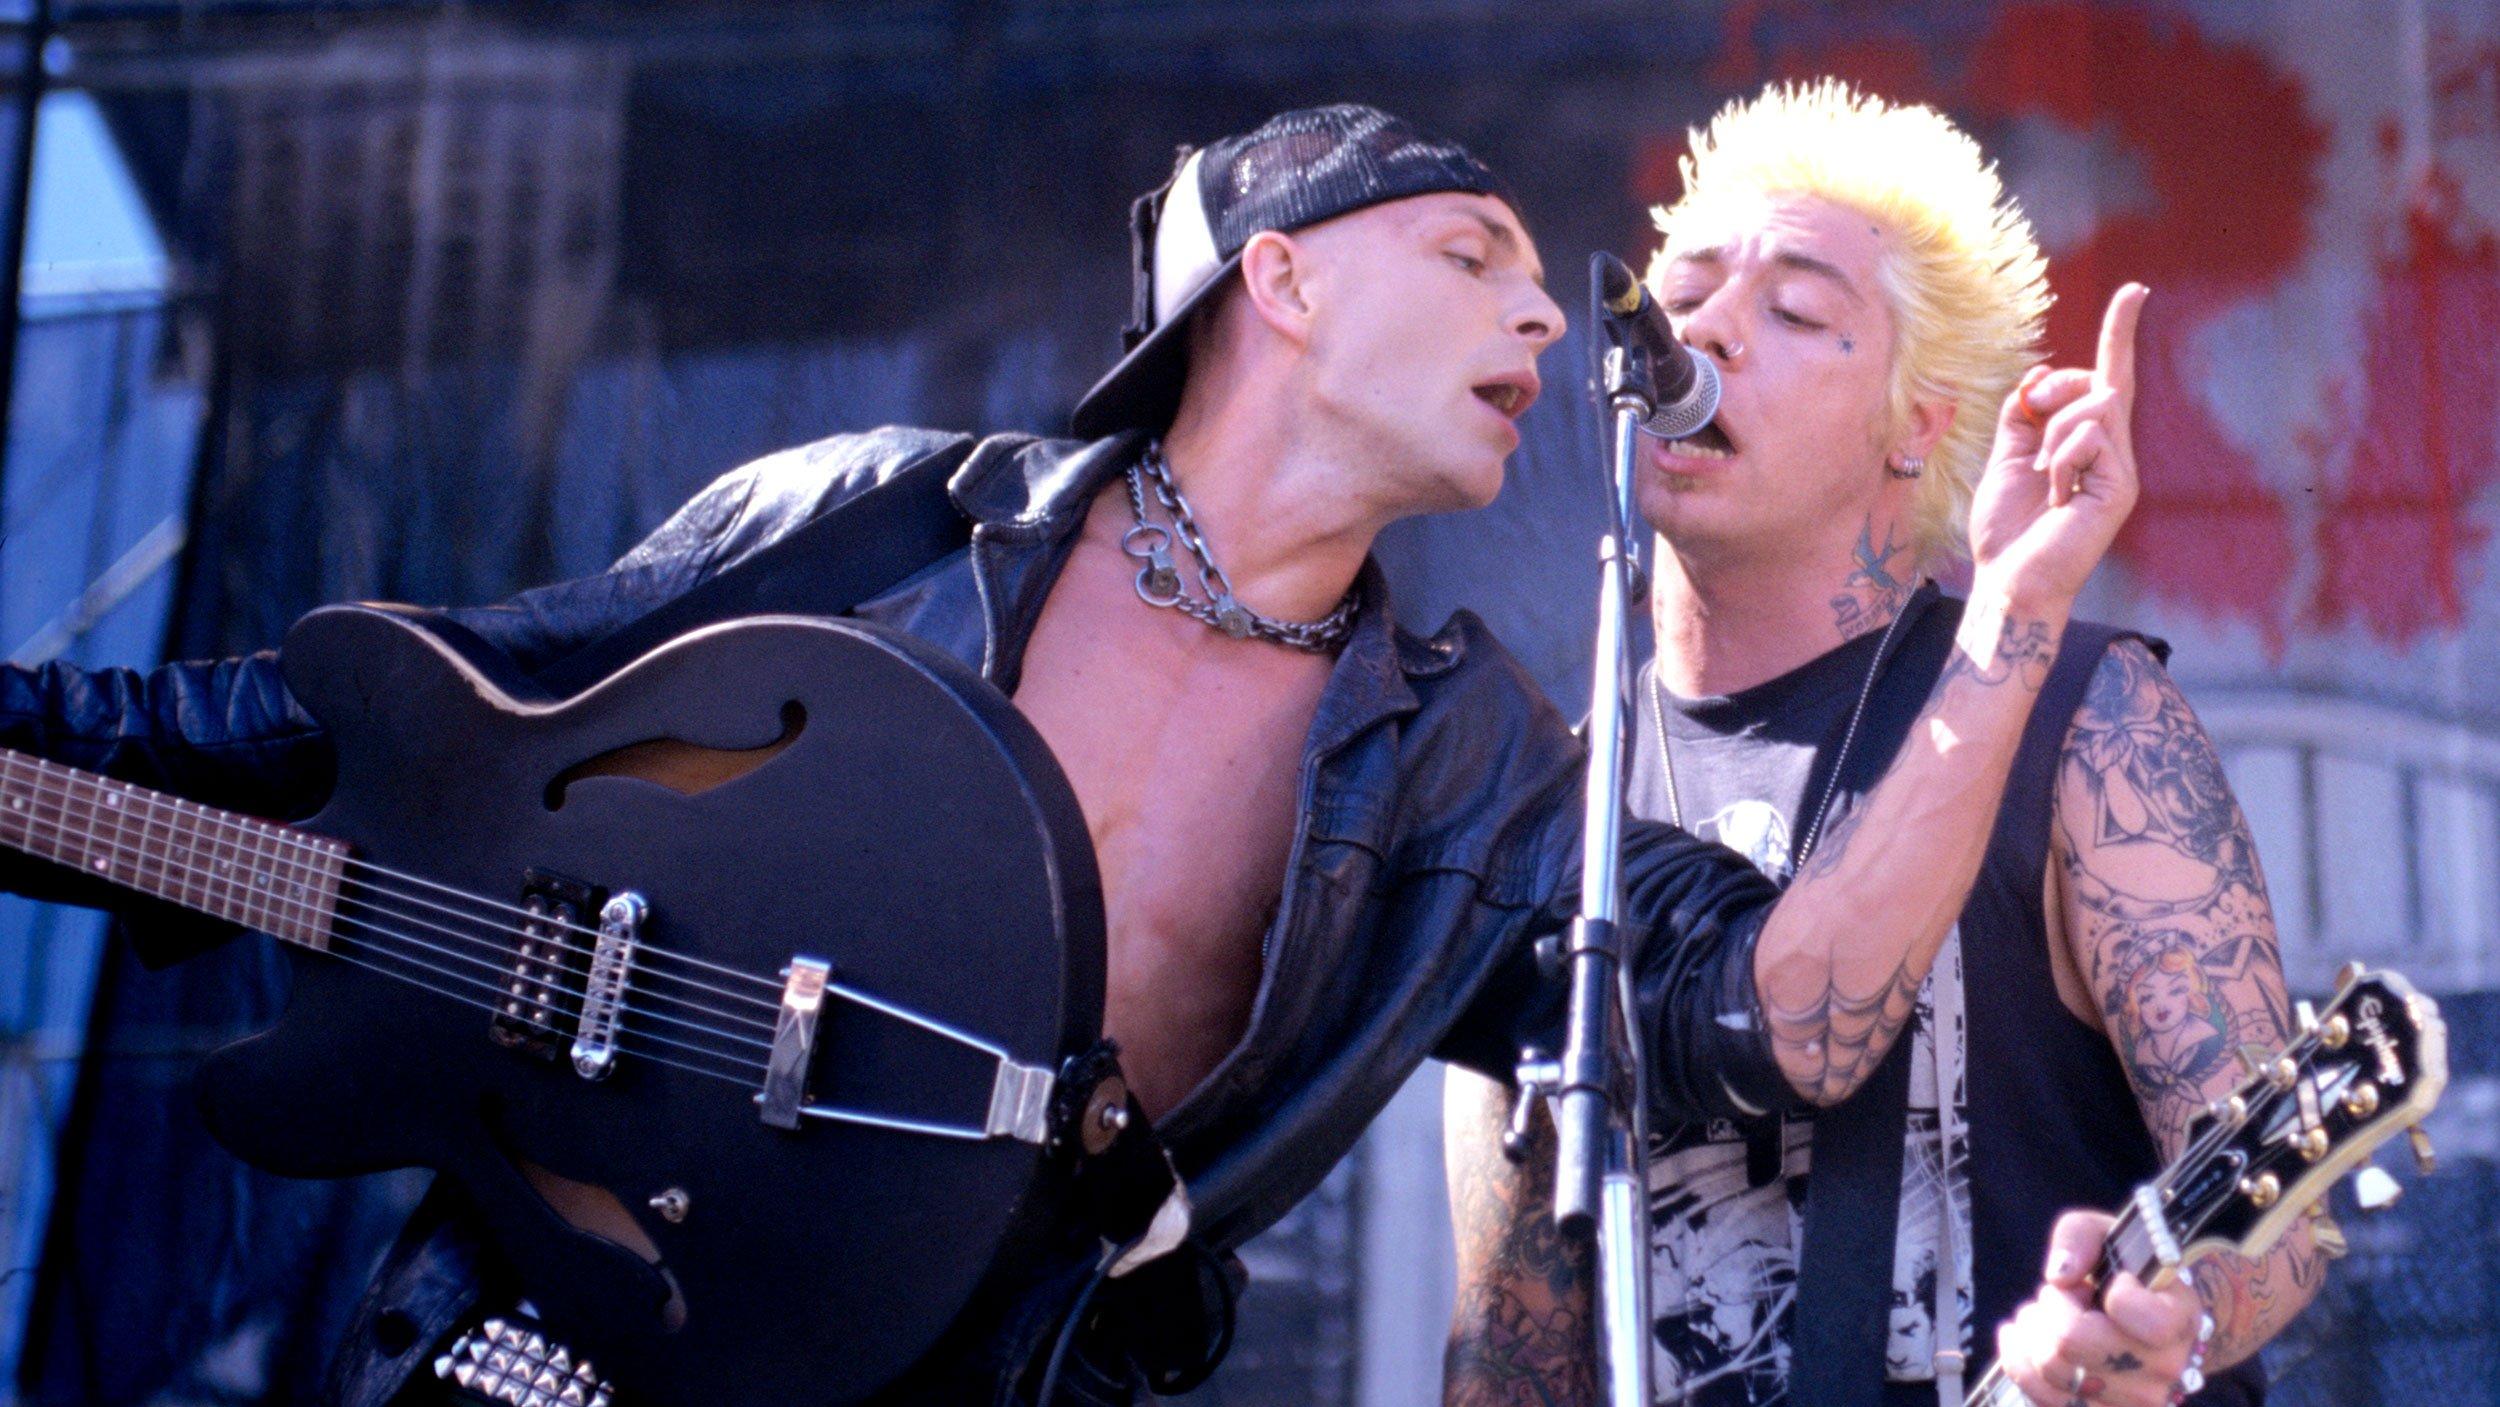 Tim Armstrong and Lars Fredricksen of Rancid perform at Lollapalooza in 1996.